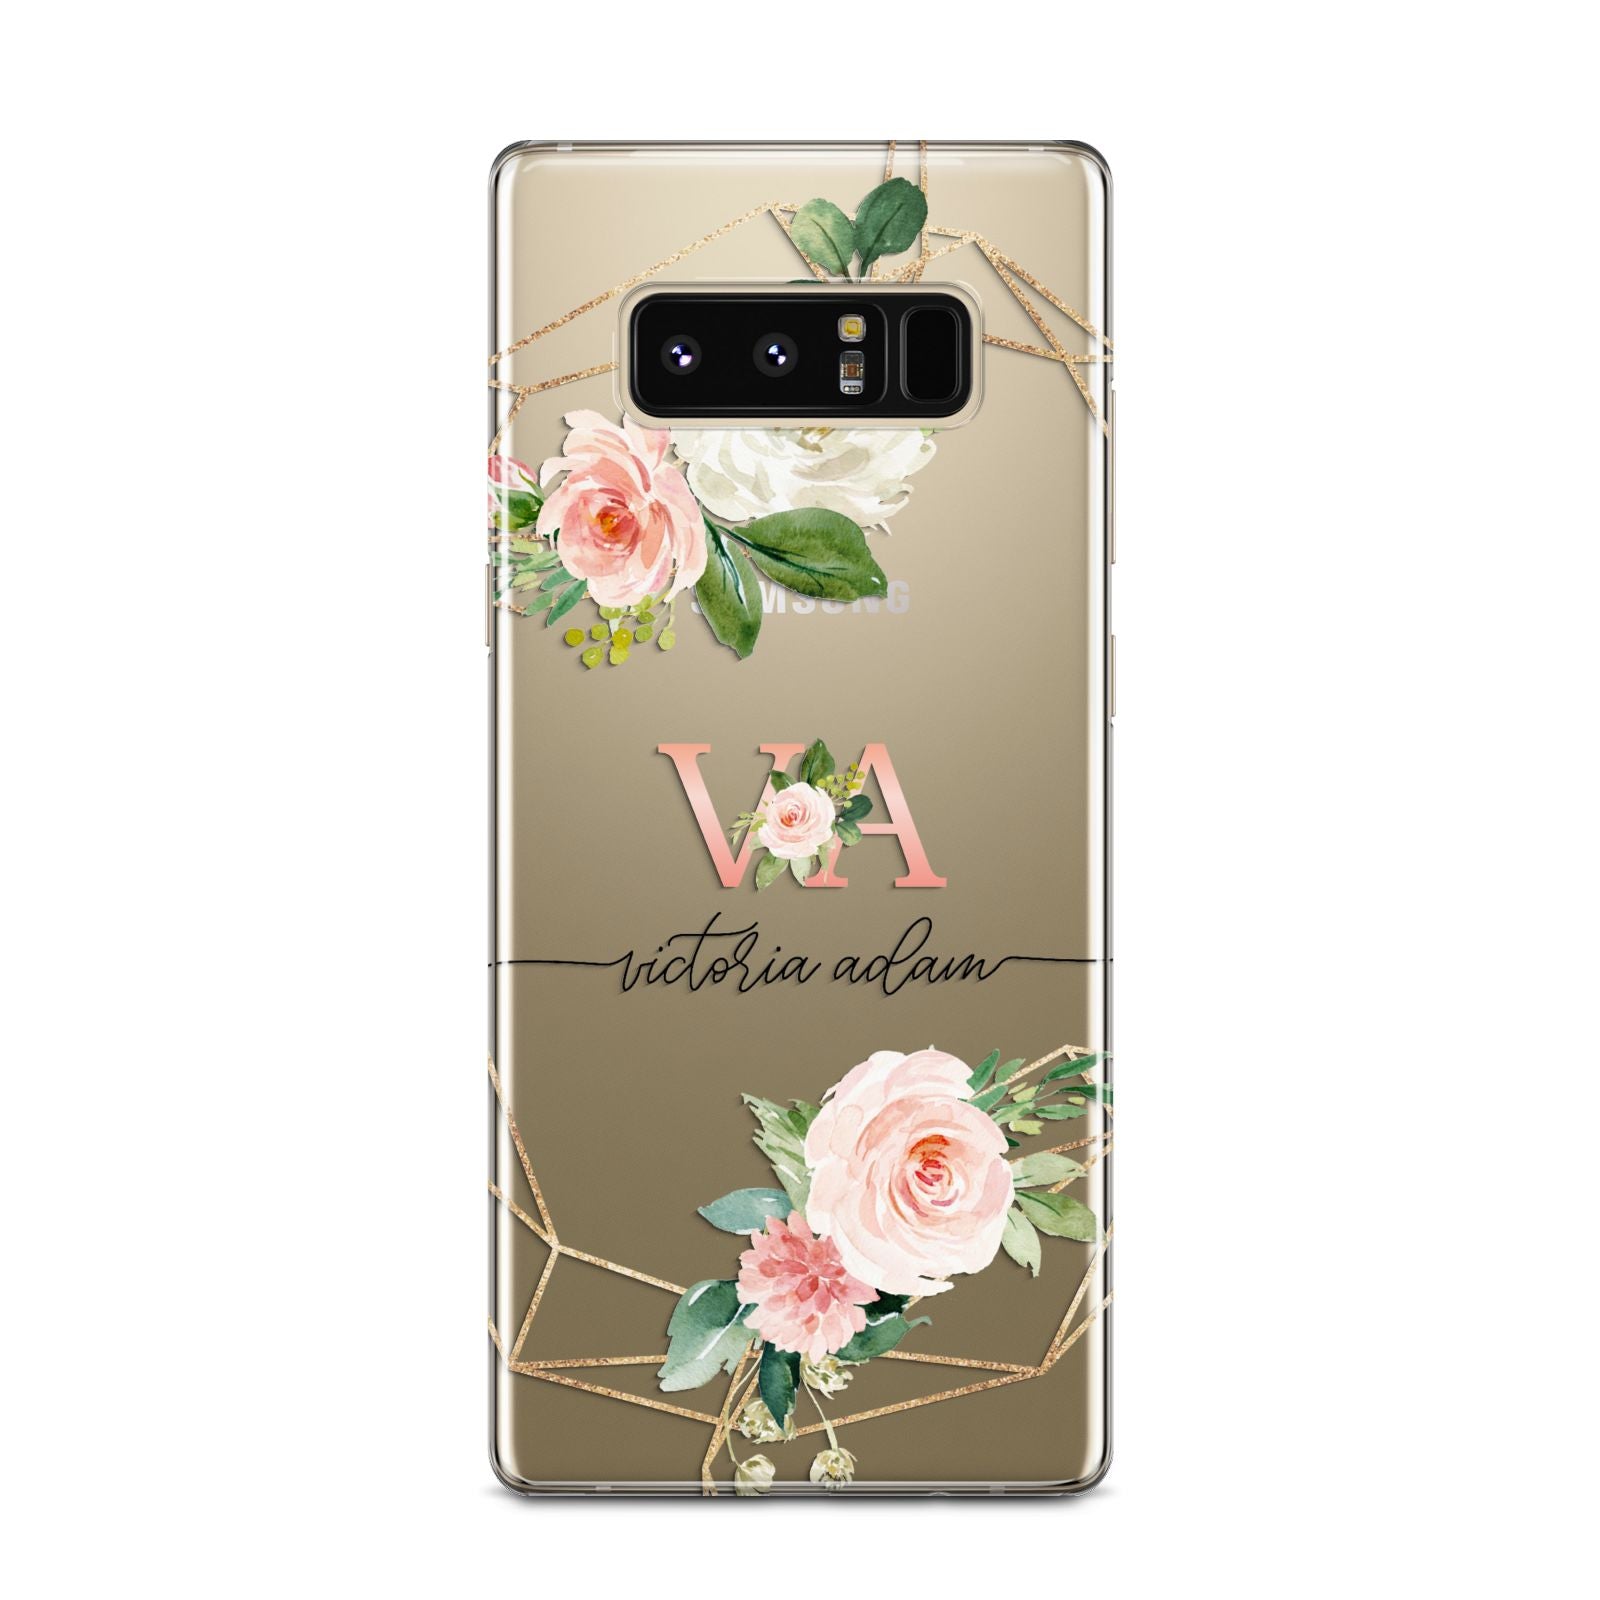 Blush Pink Rose Floral Personalised Samsung Galaxy Note 8 Case